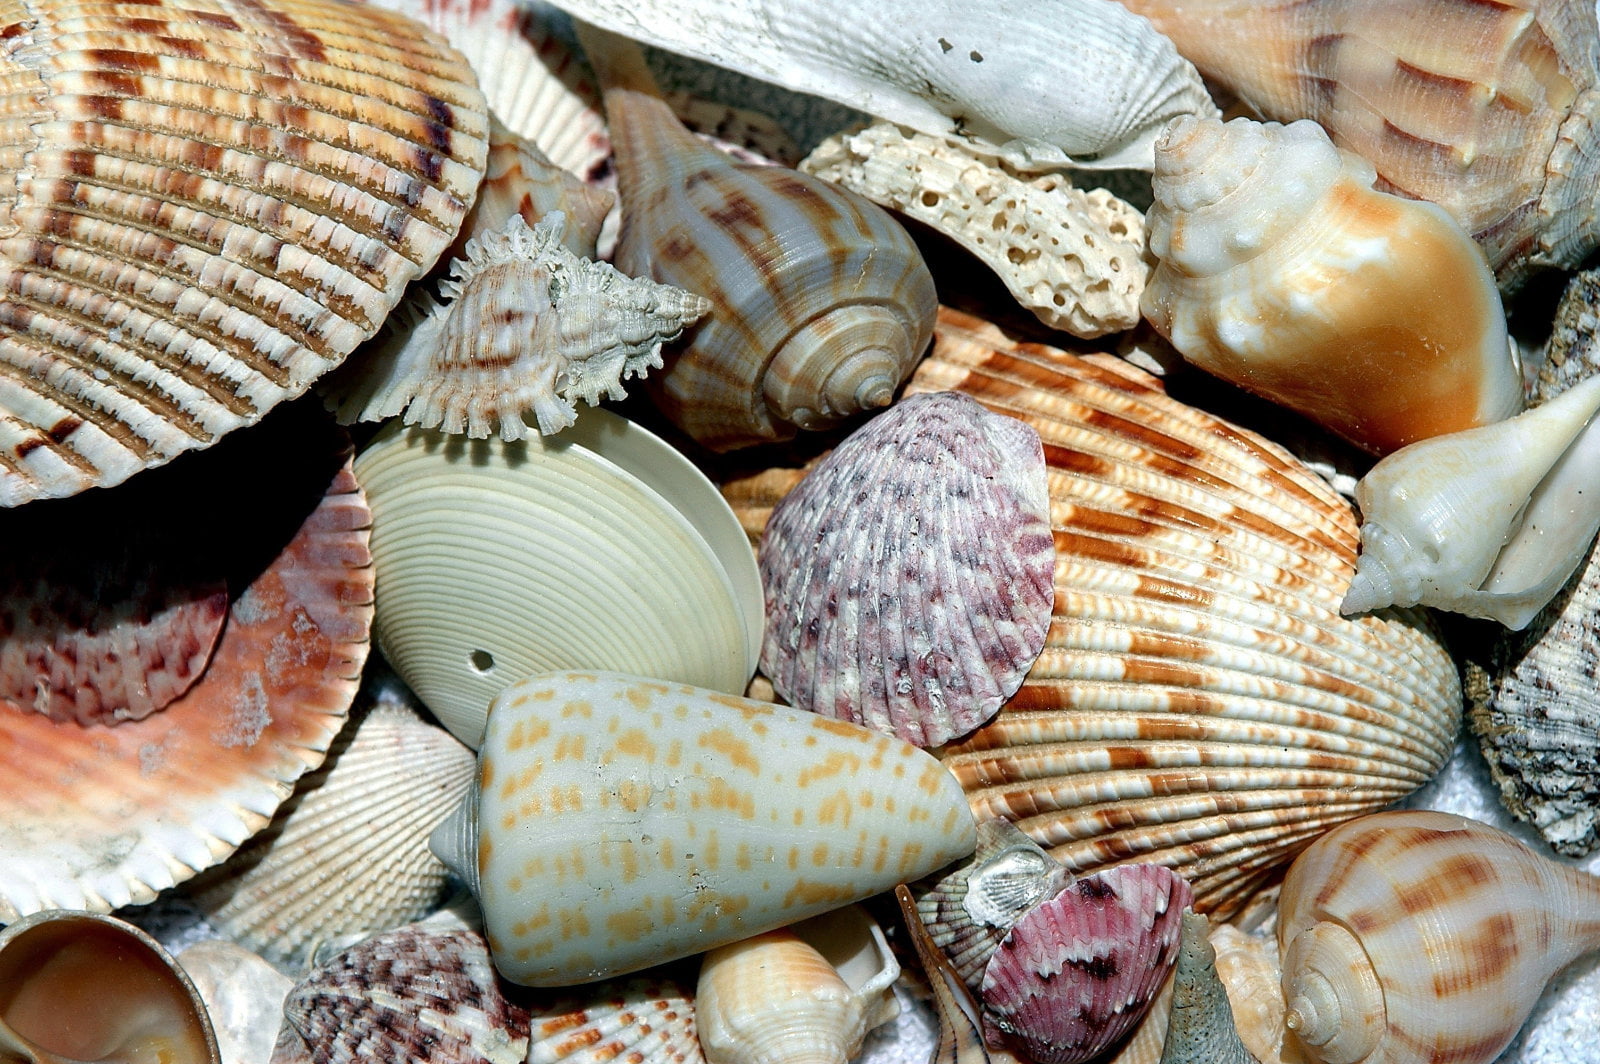 Shelling Guide in Lovers Key, Florida